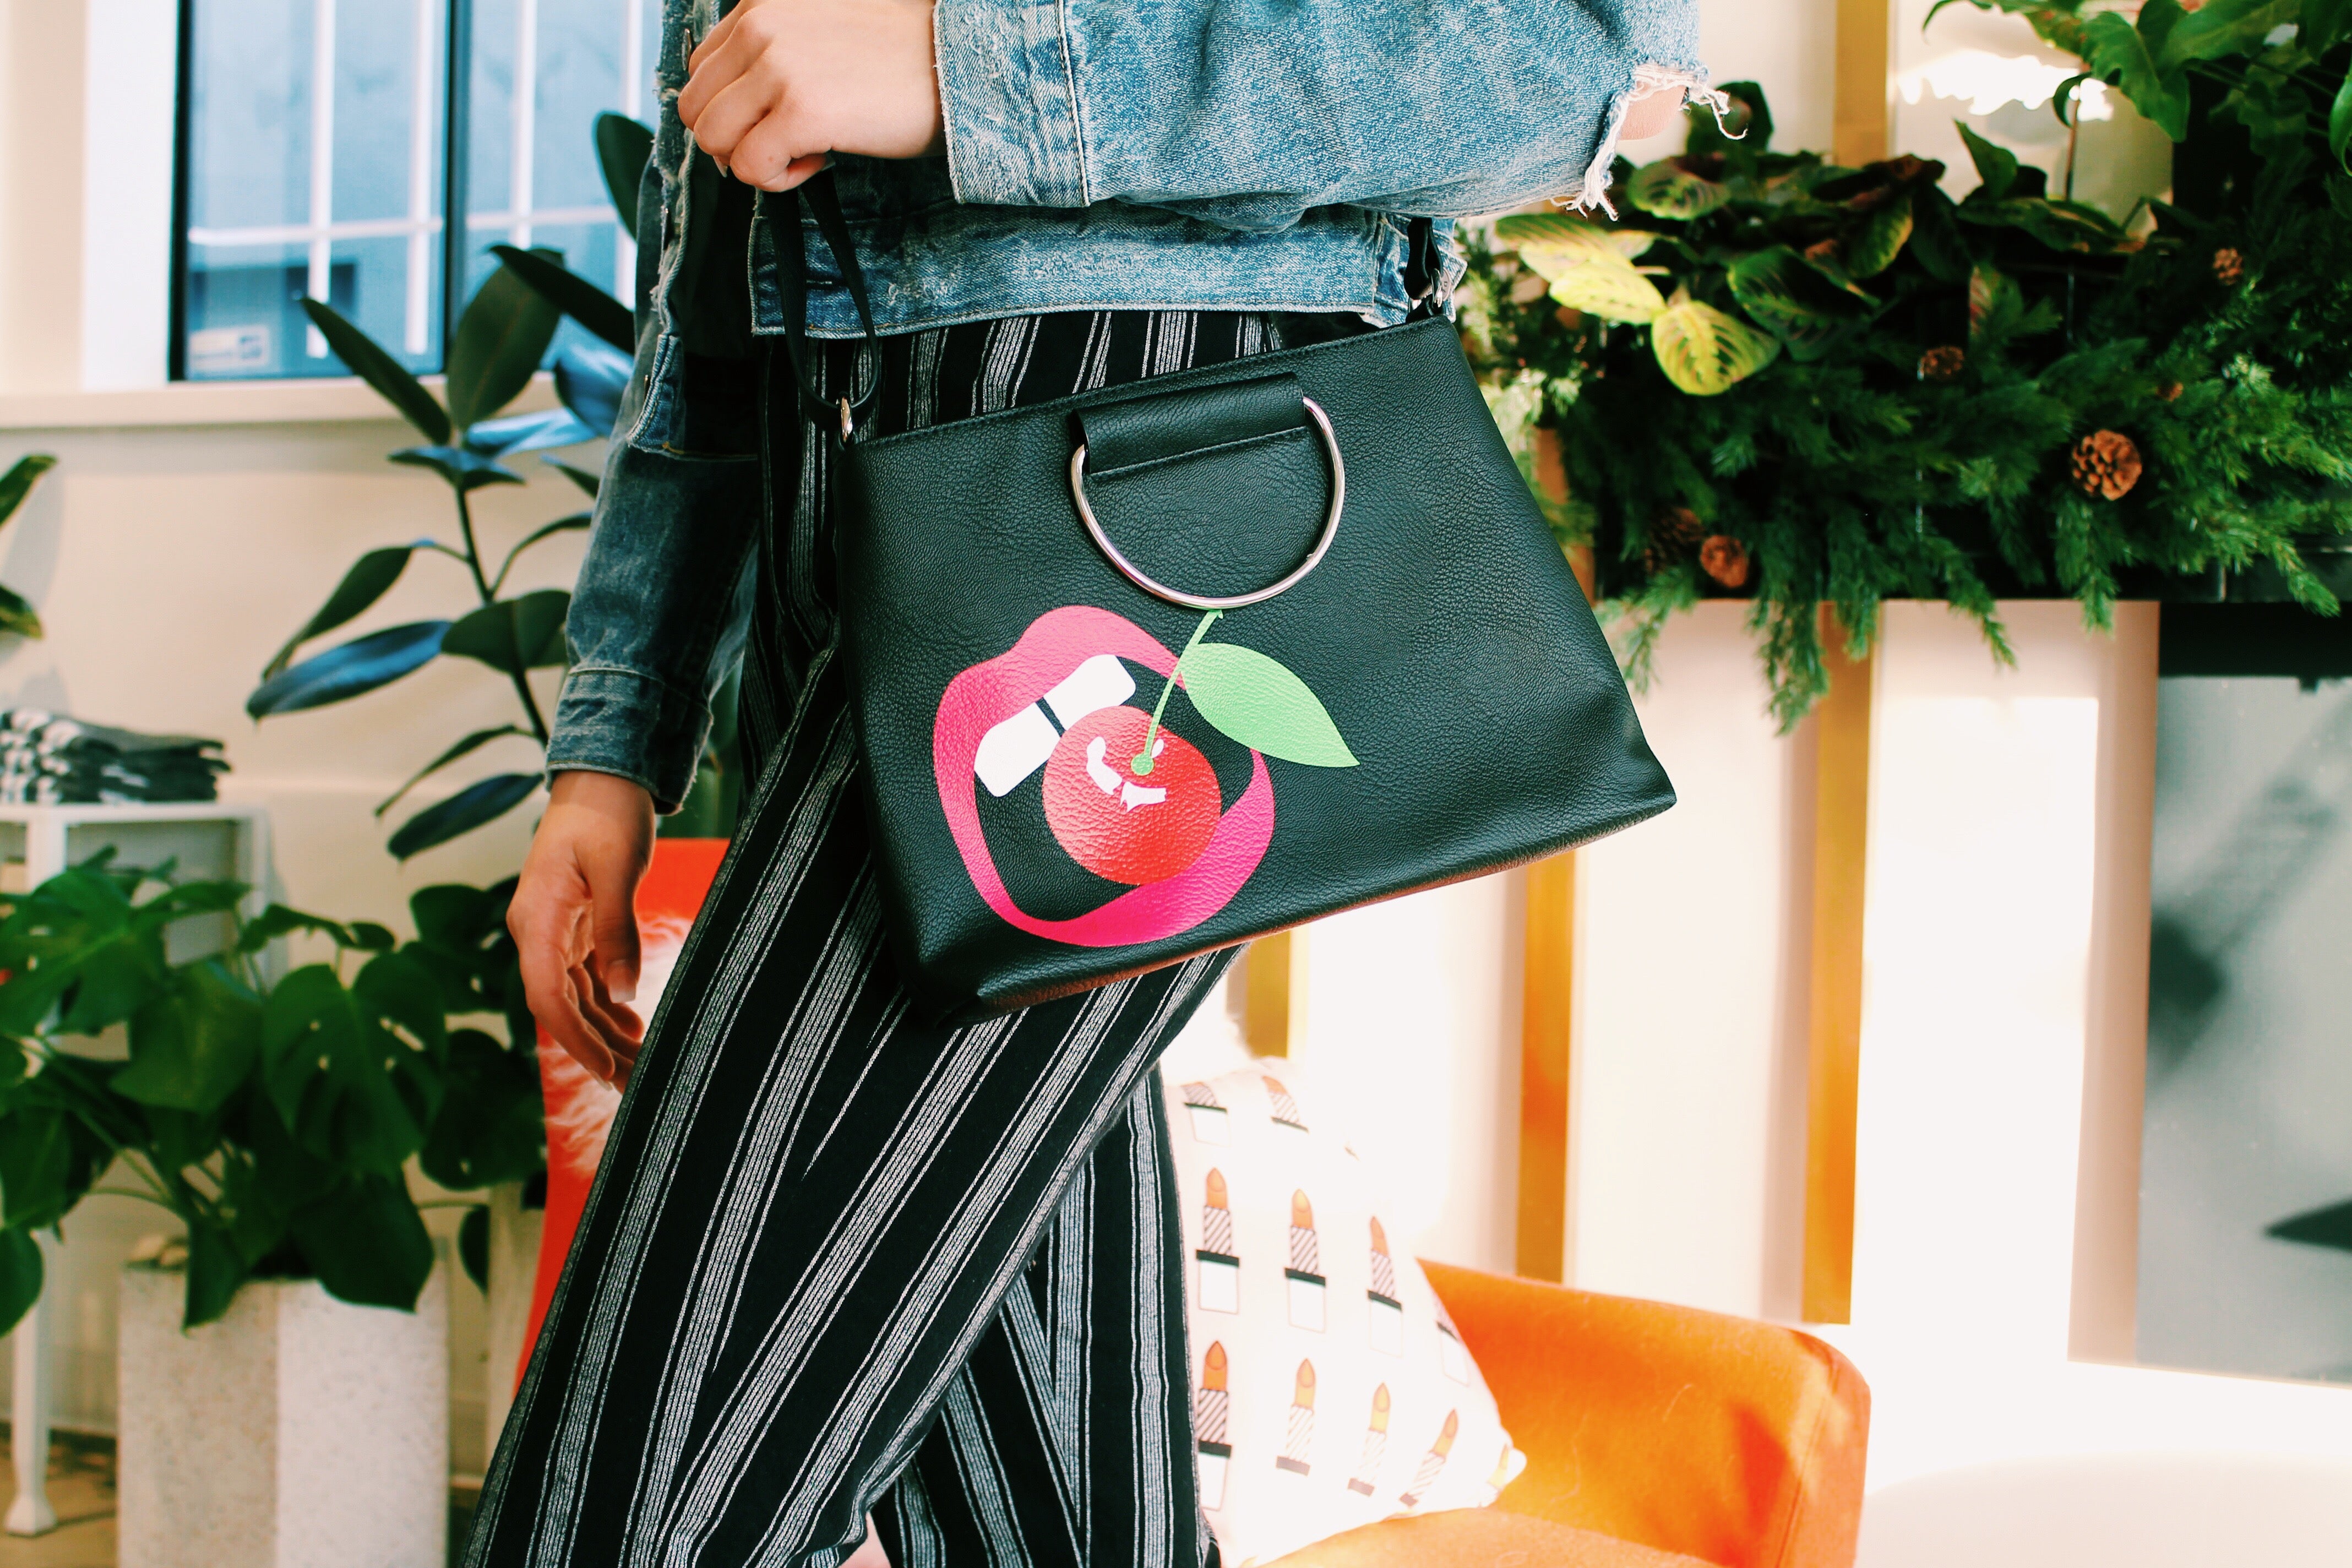 For the Record Ring Satchel in Cherry Bomb